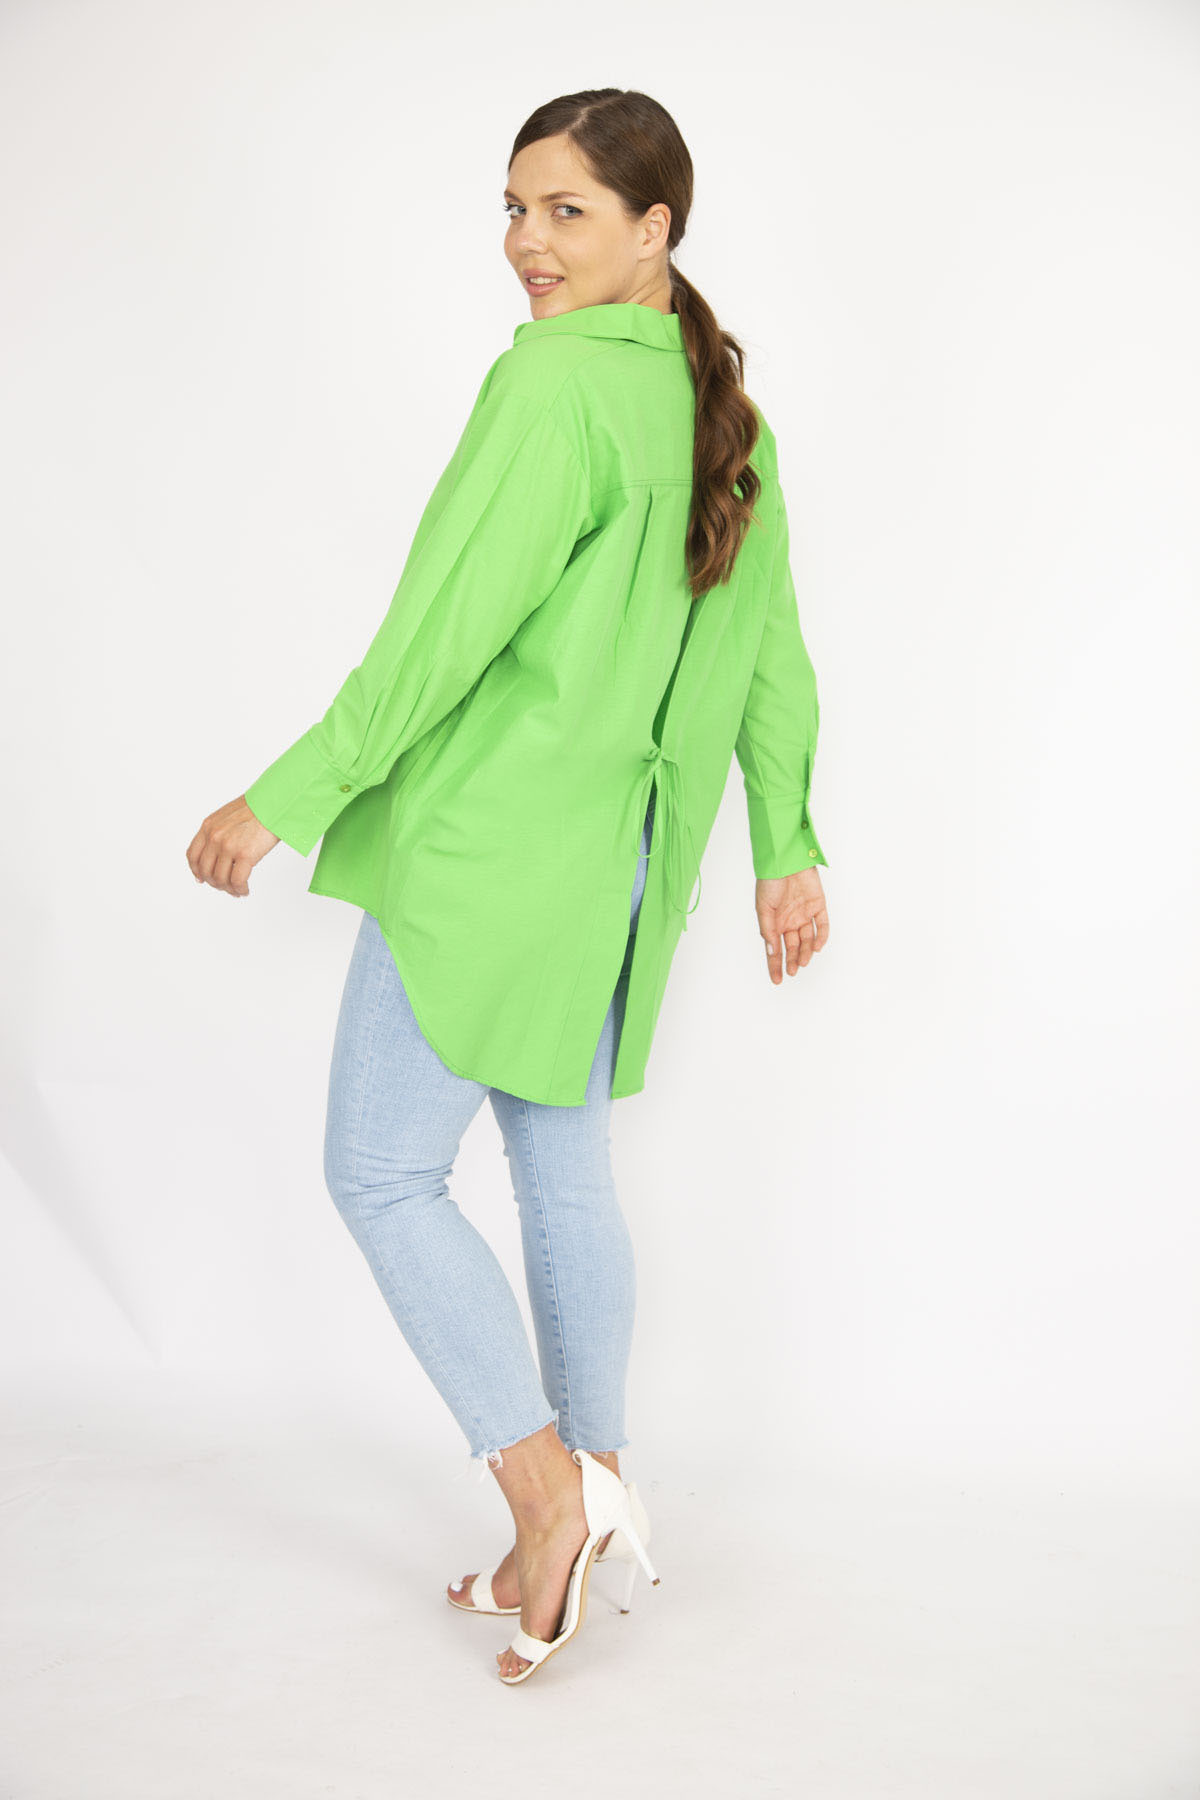 Levně Şans Women's Plus Size Green Shirt with a slit in the back and laces and buttoned front buttons